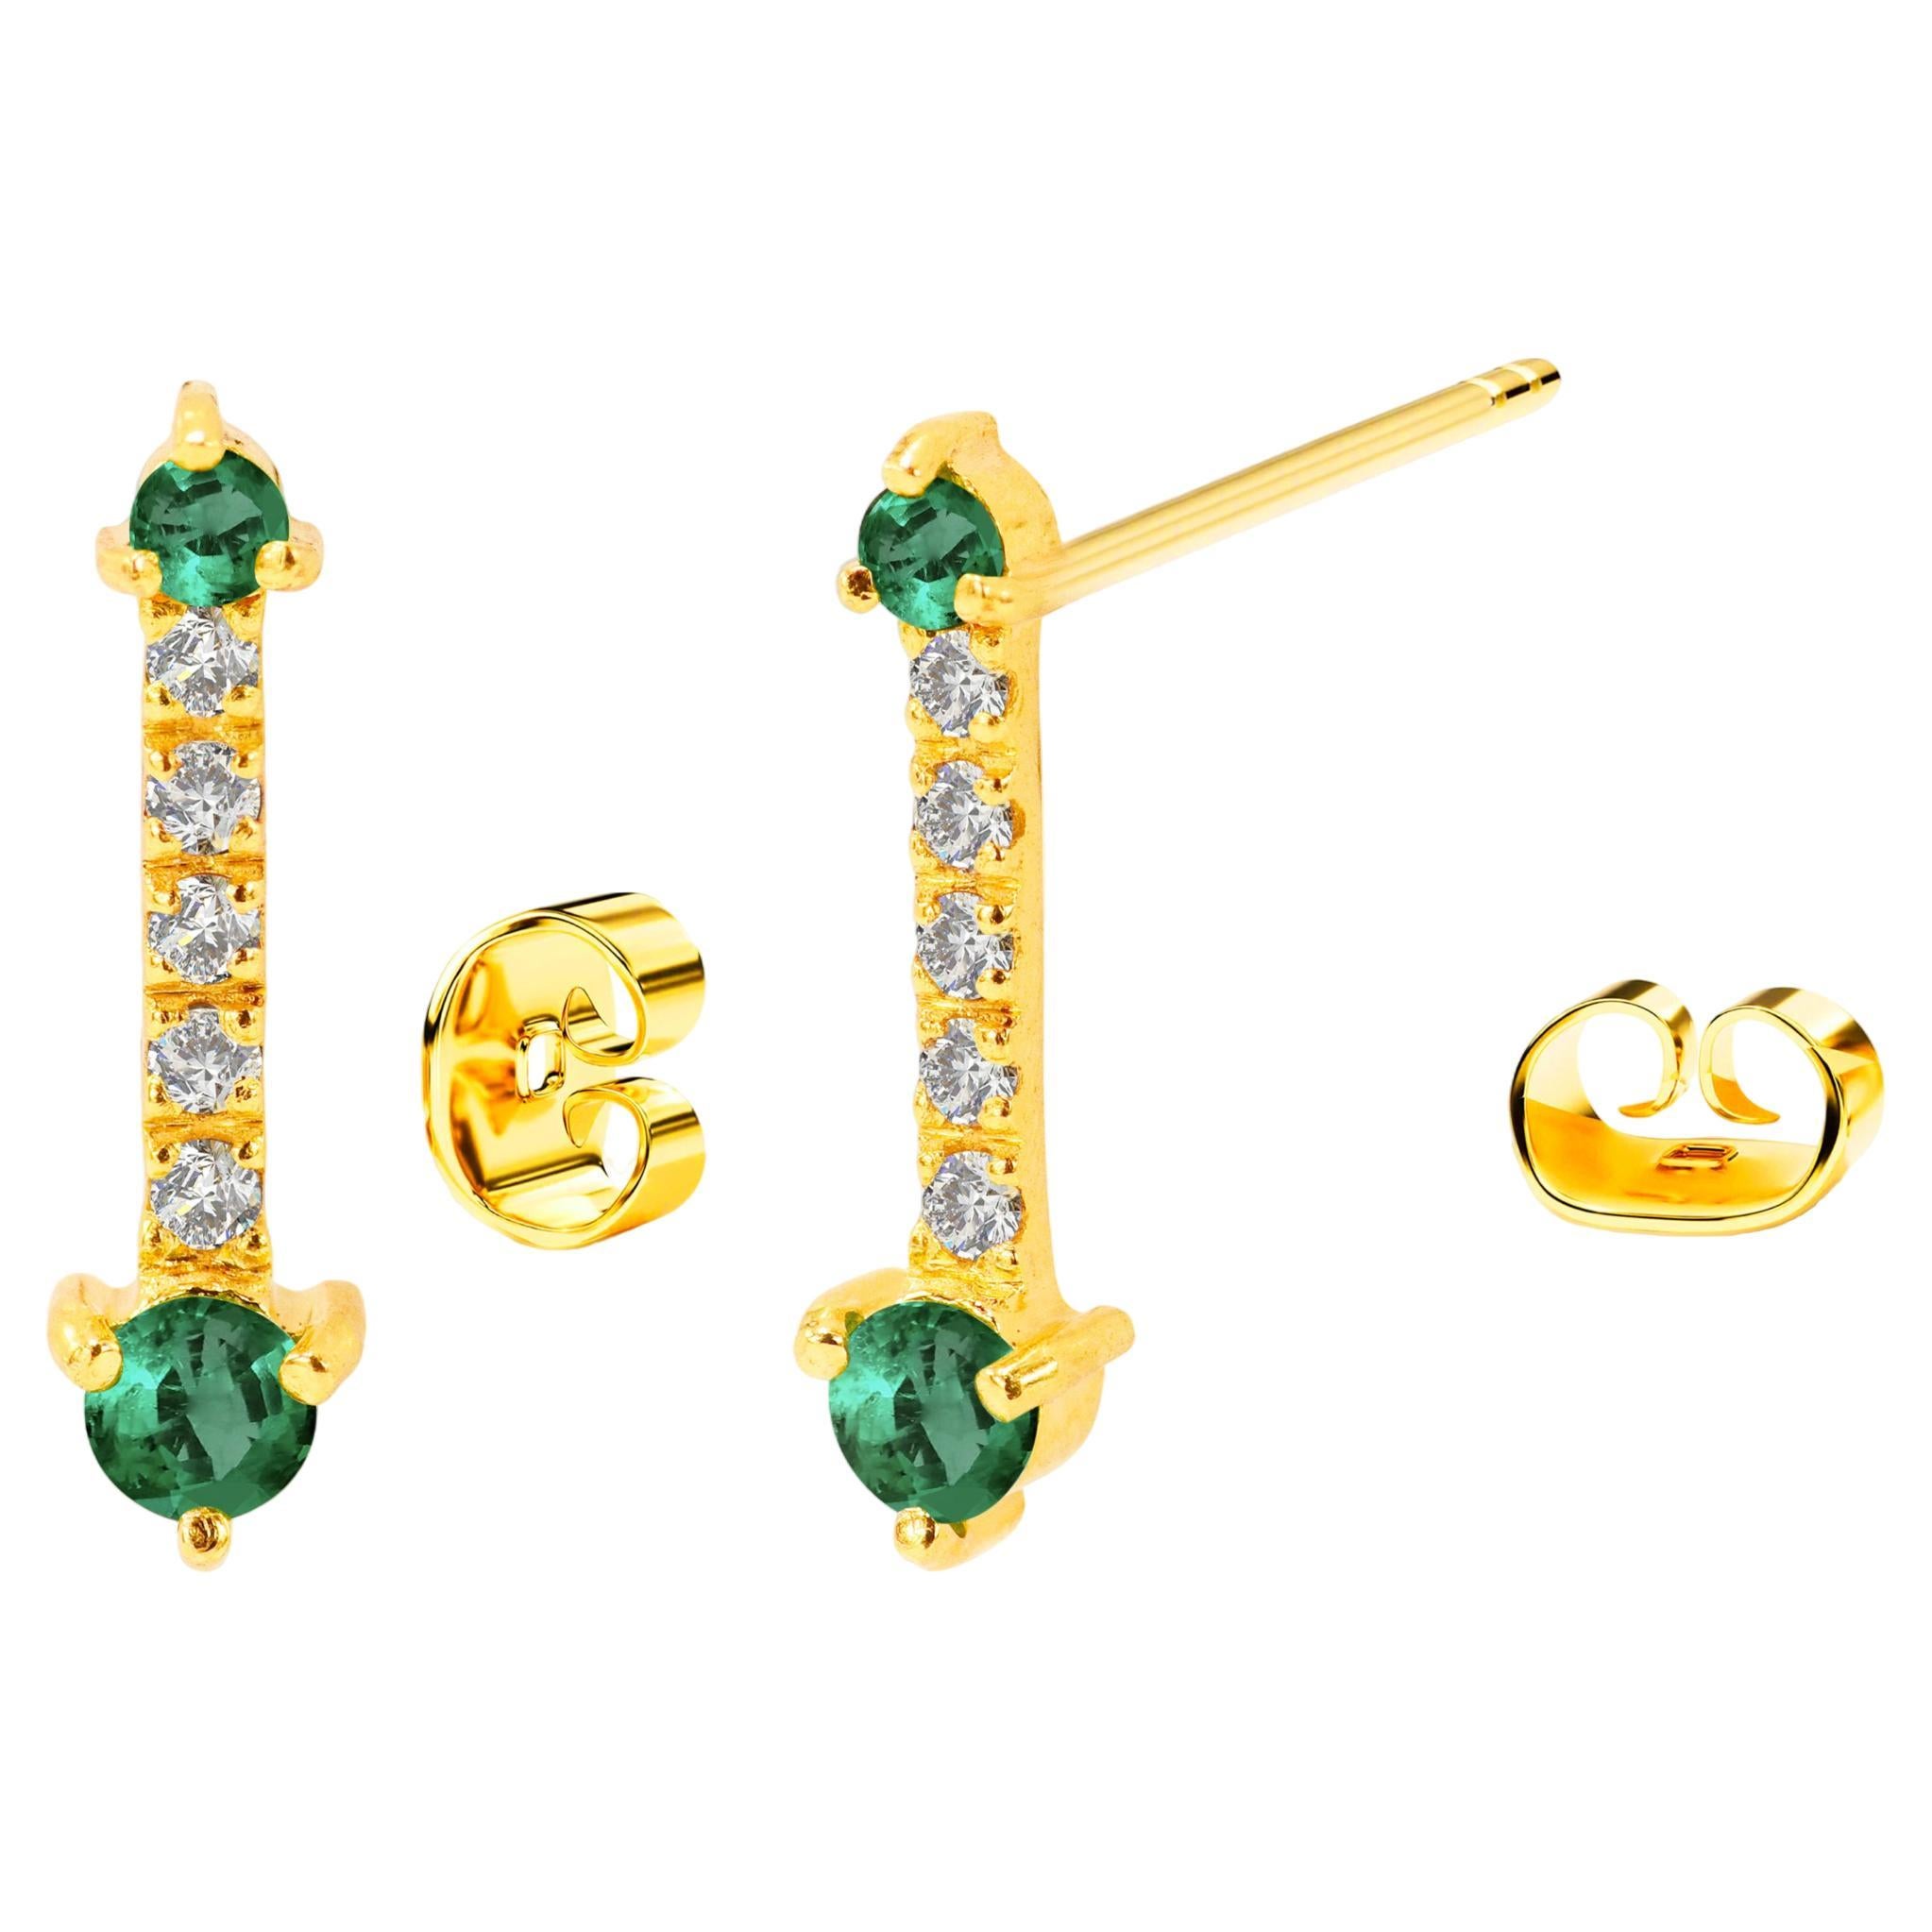 18k Gold Emerald Earrings with Round Diamond Stud Earrings For Sale